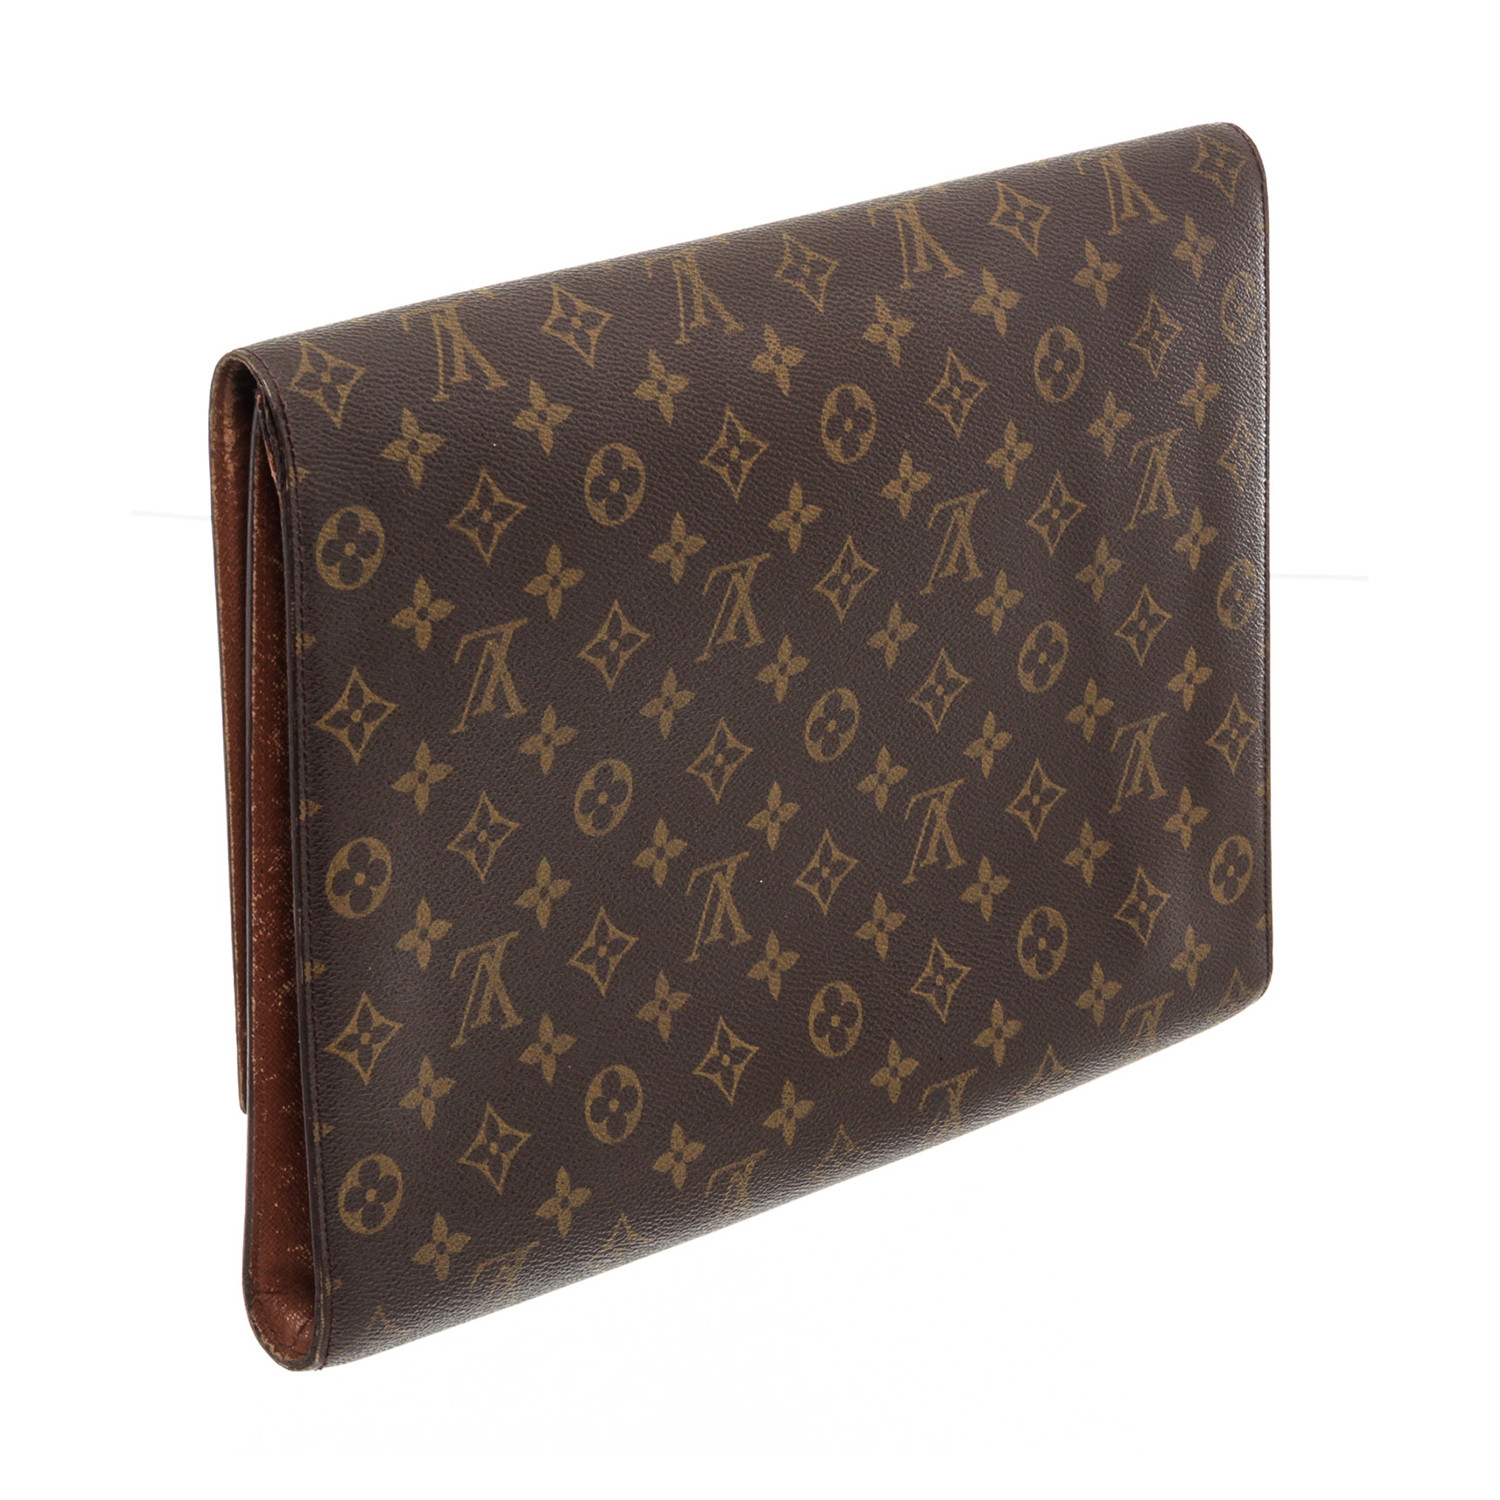 Lv Clemence Wallet Canada  Natural Resource Department